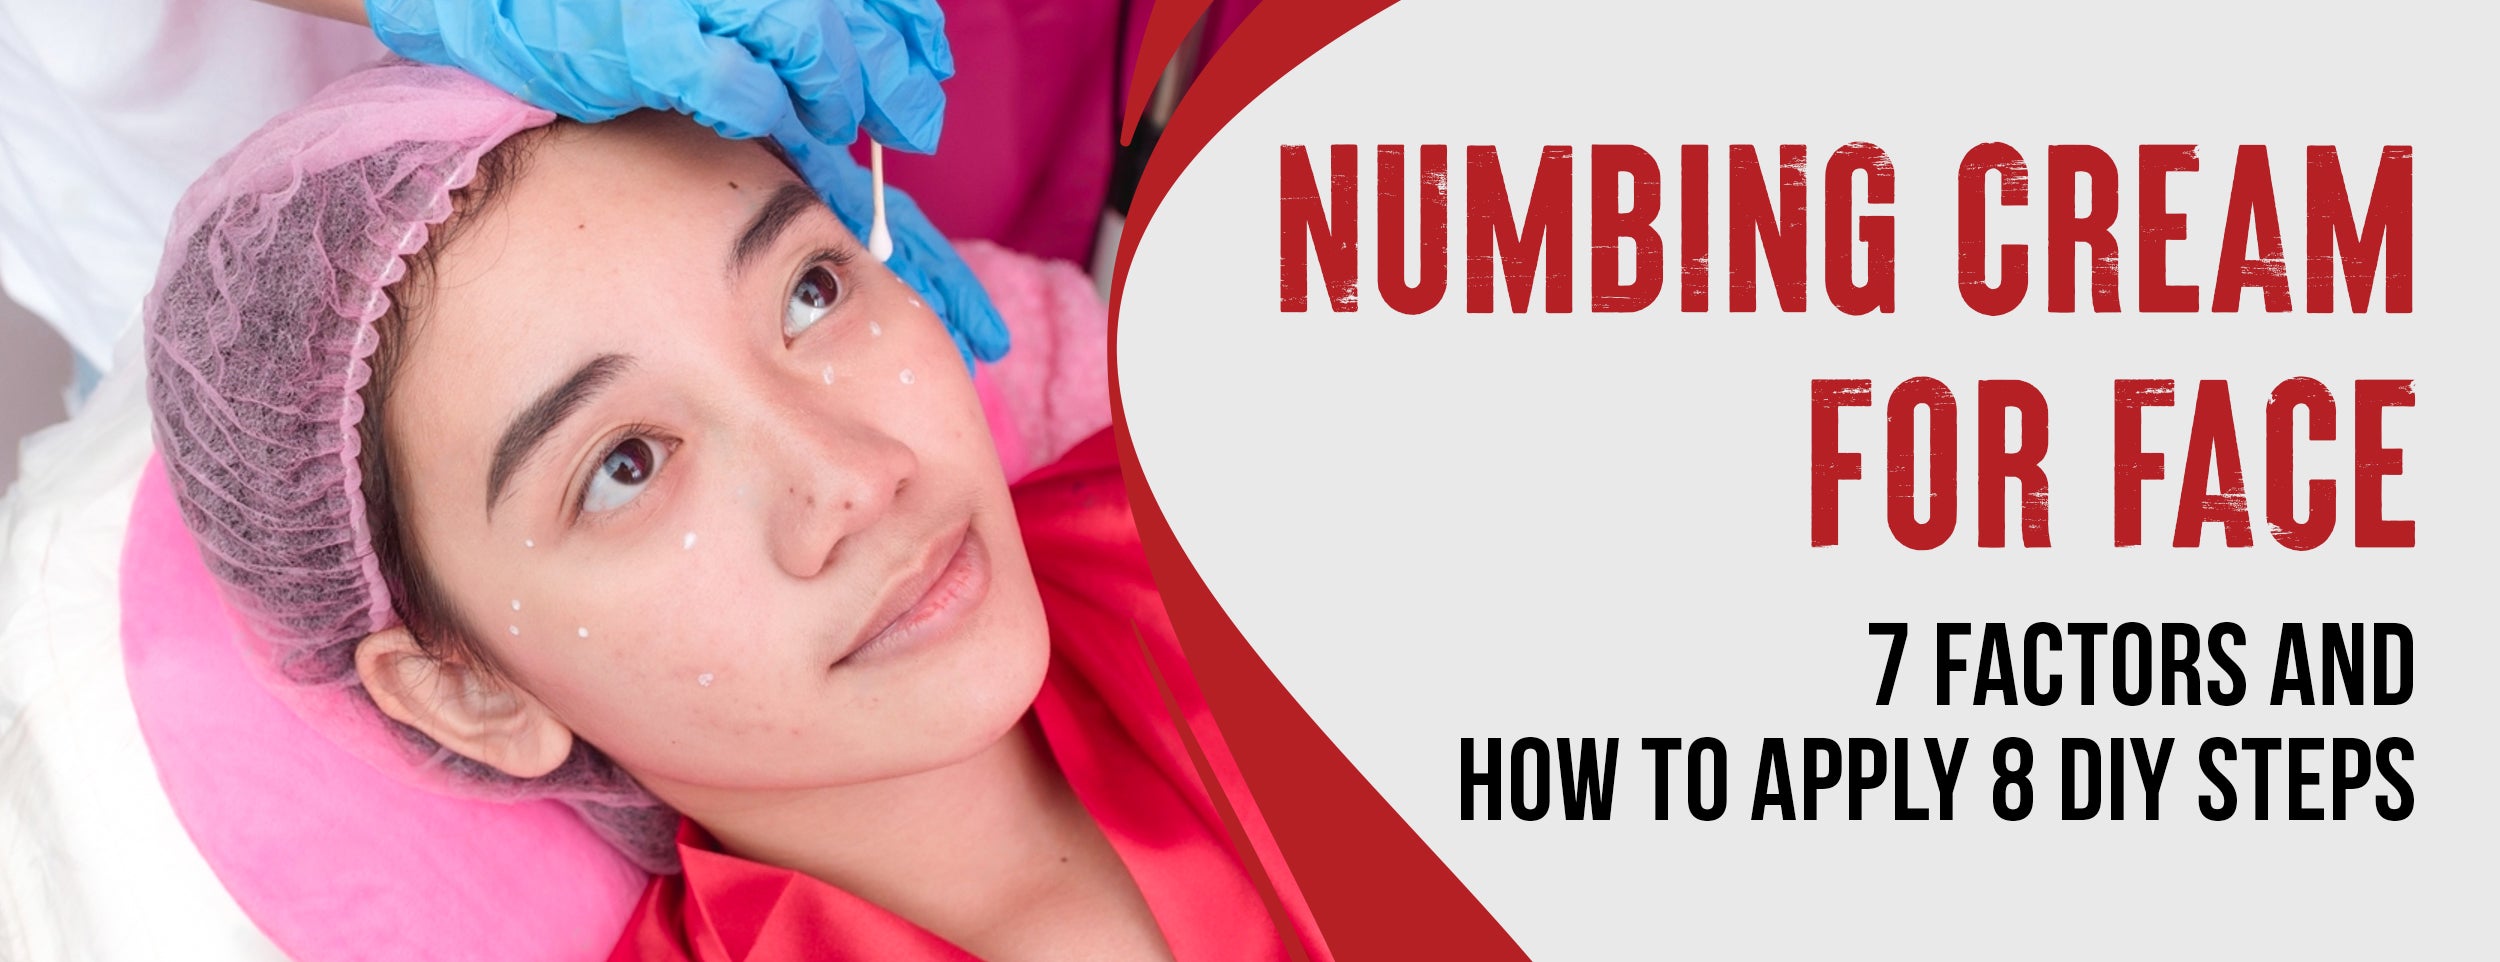 Numbing Cream For Face: 7 Factors & How to Apply [8 DIY Steps]